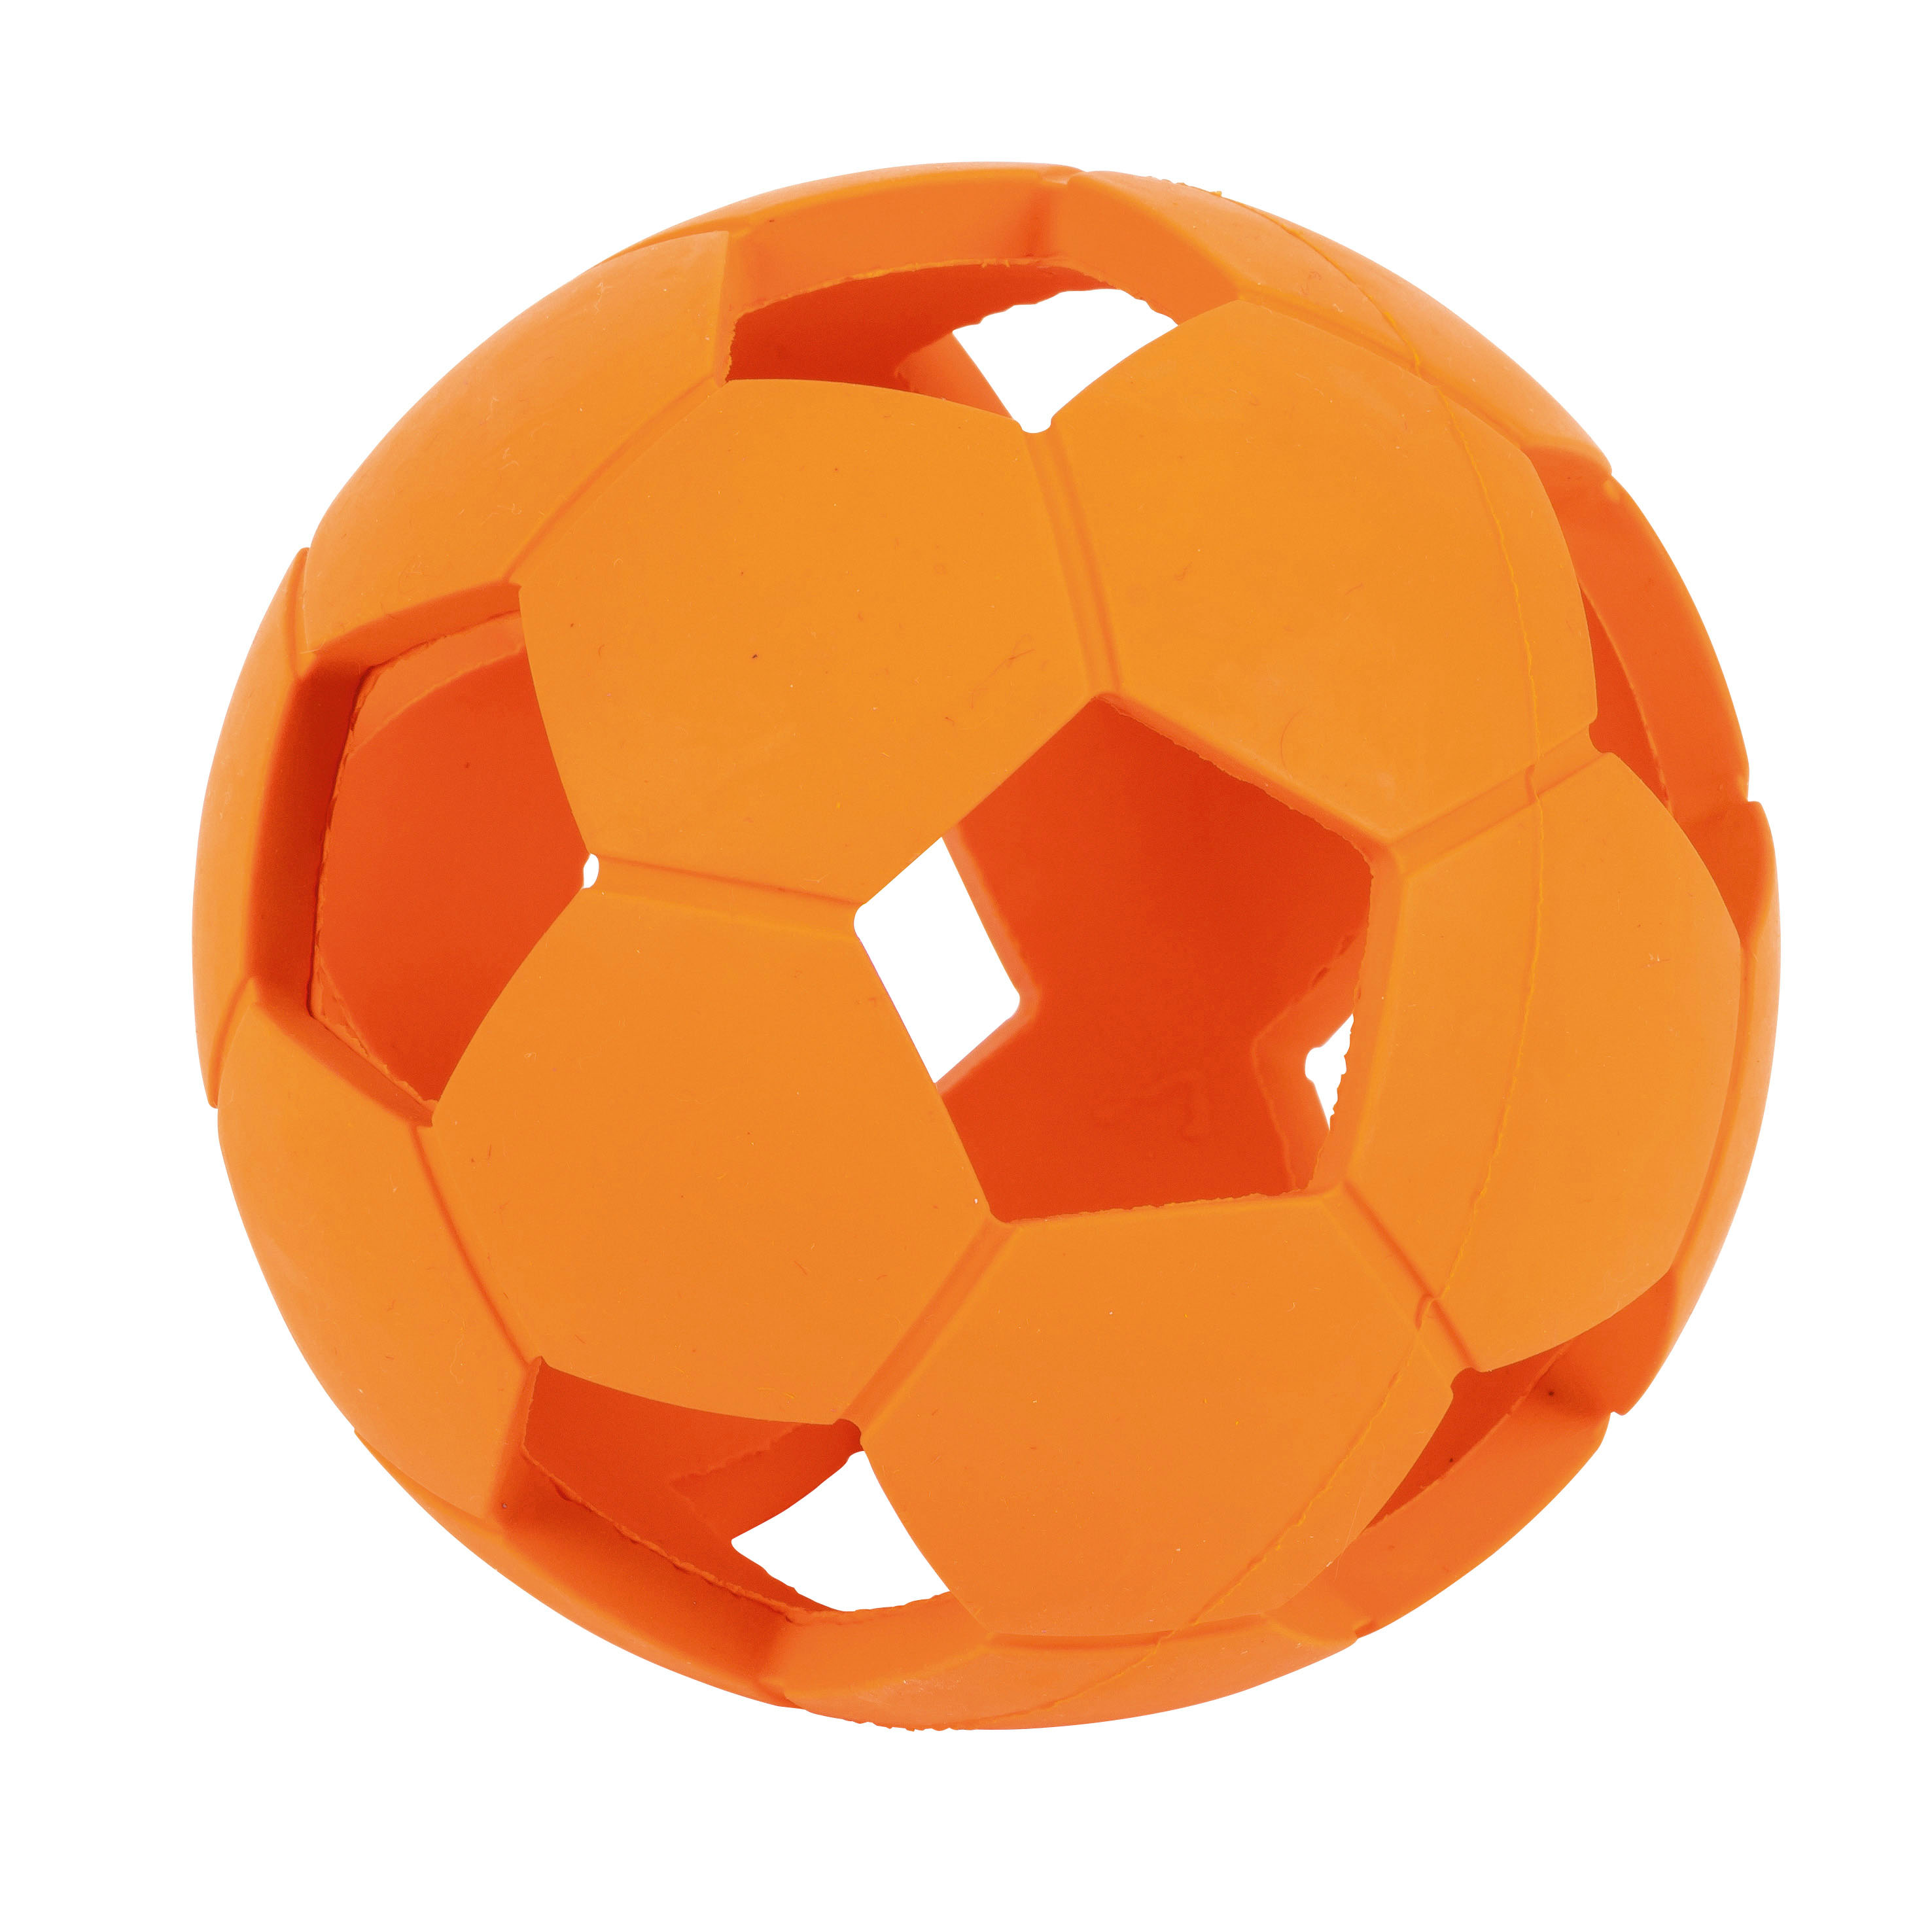 GOOD RUBBER VOETBAL HOL 1ST 11,4x11,4cm